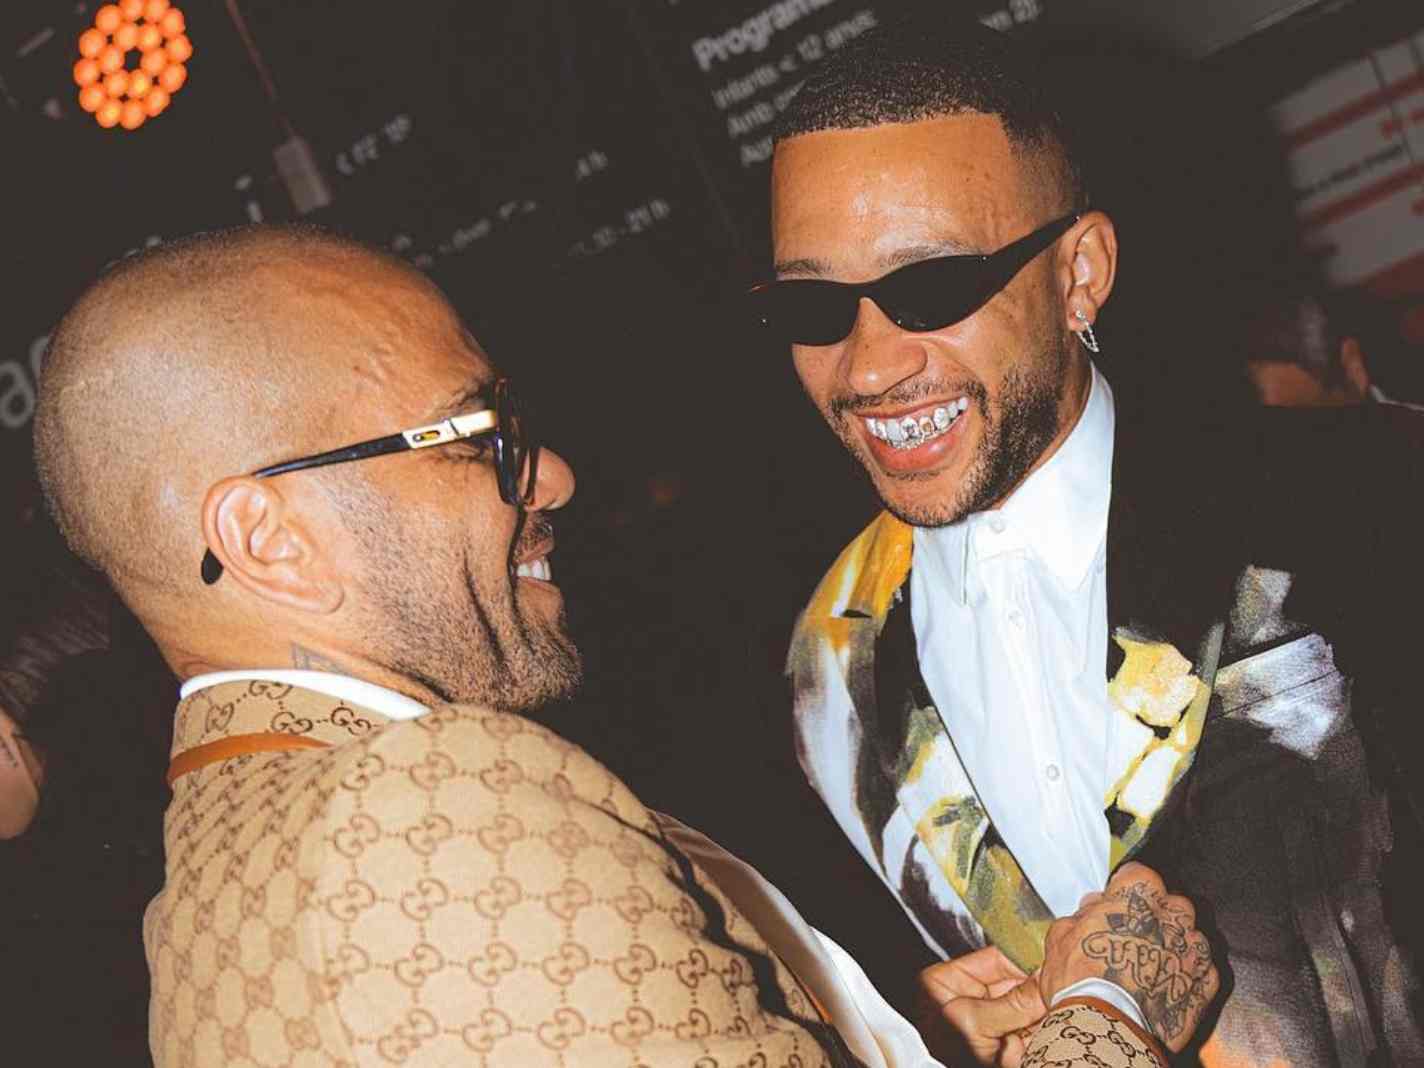 Memphis Depay and Dani Alves show off the pitch chemistry in these awesome photos